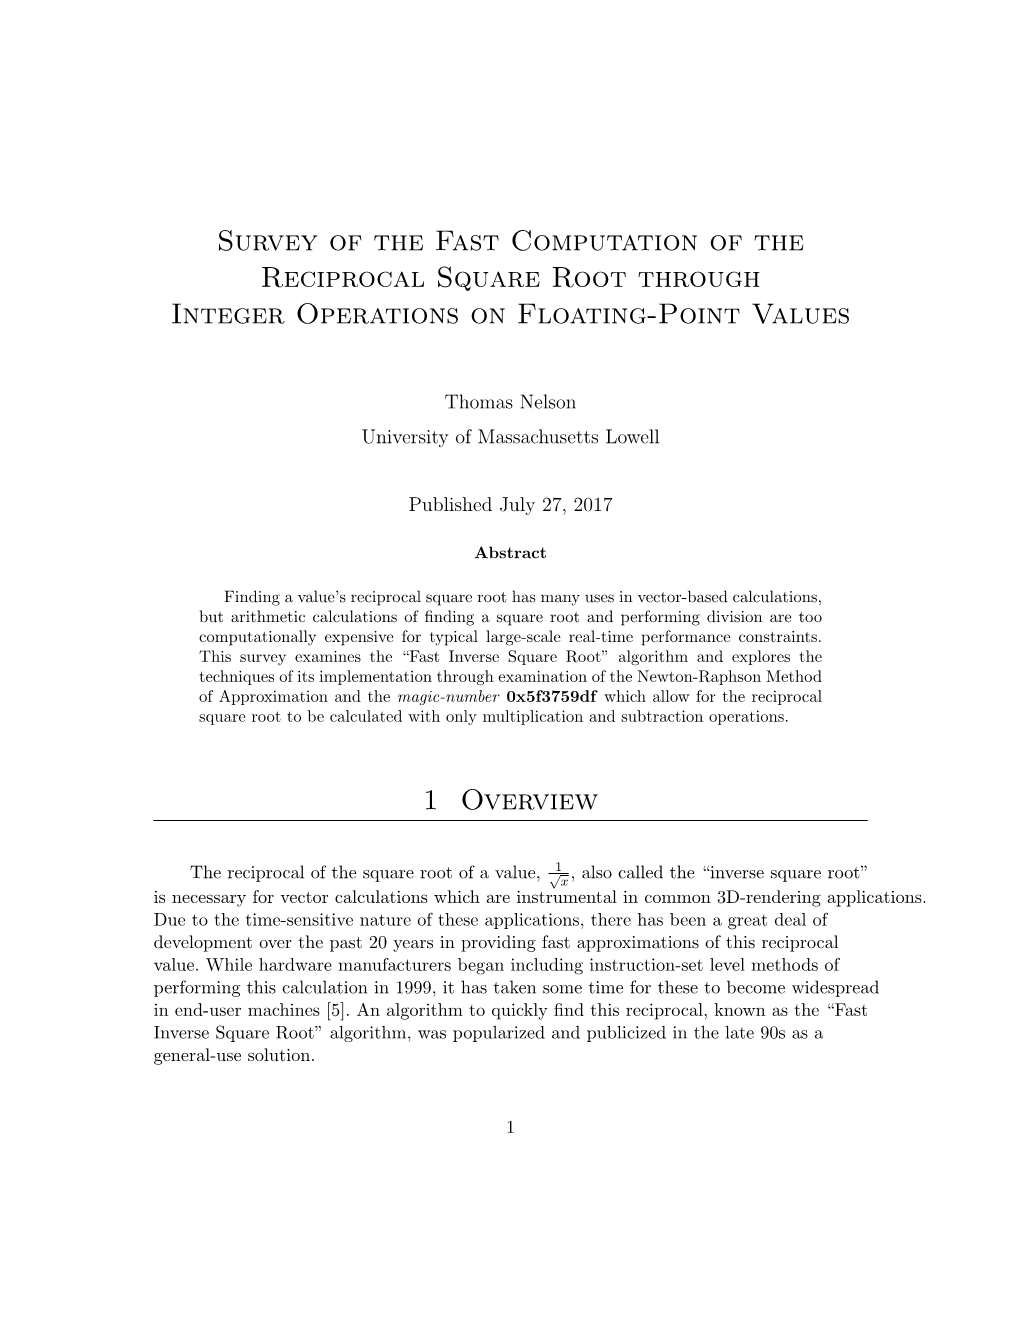 Survey of the Fast Computation of the Reciprocal Square Root Through Integer Operations on Floating-Point Values